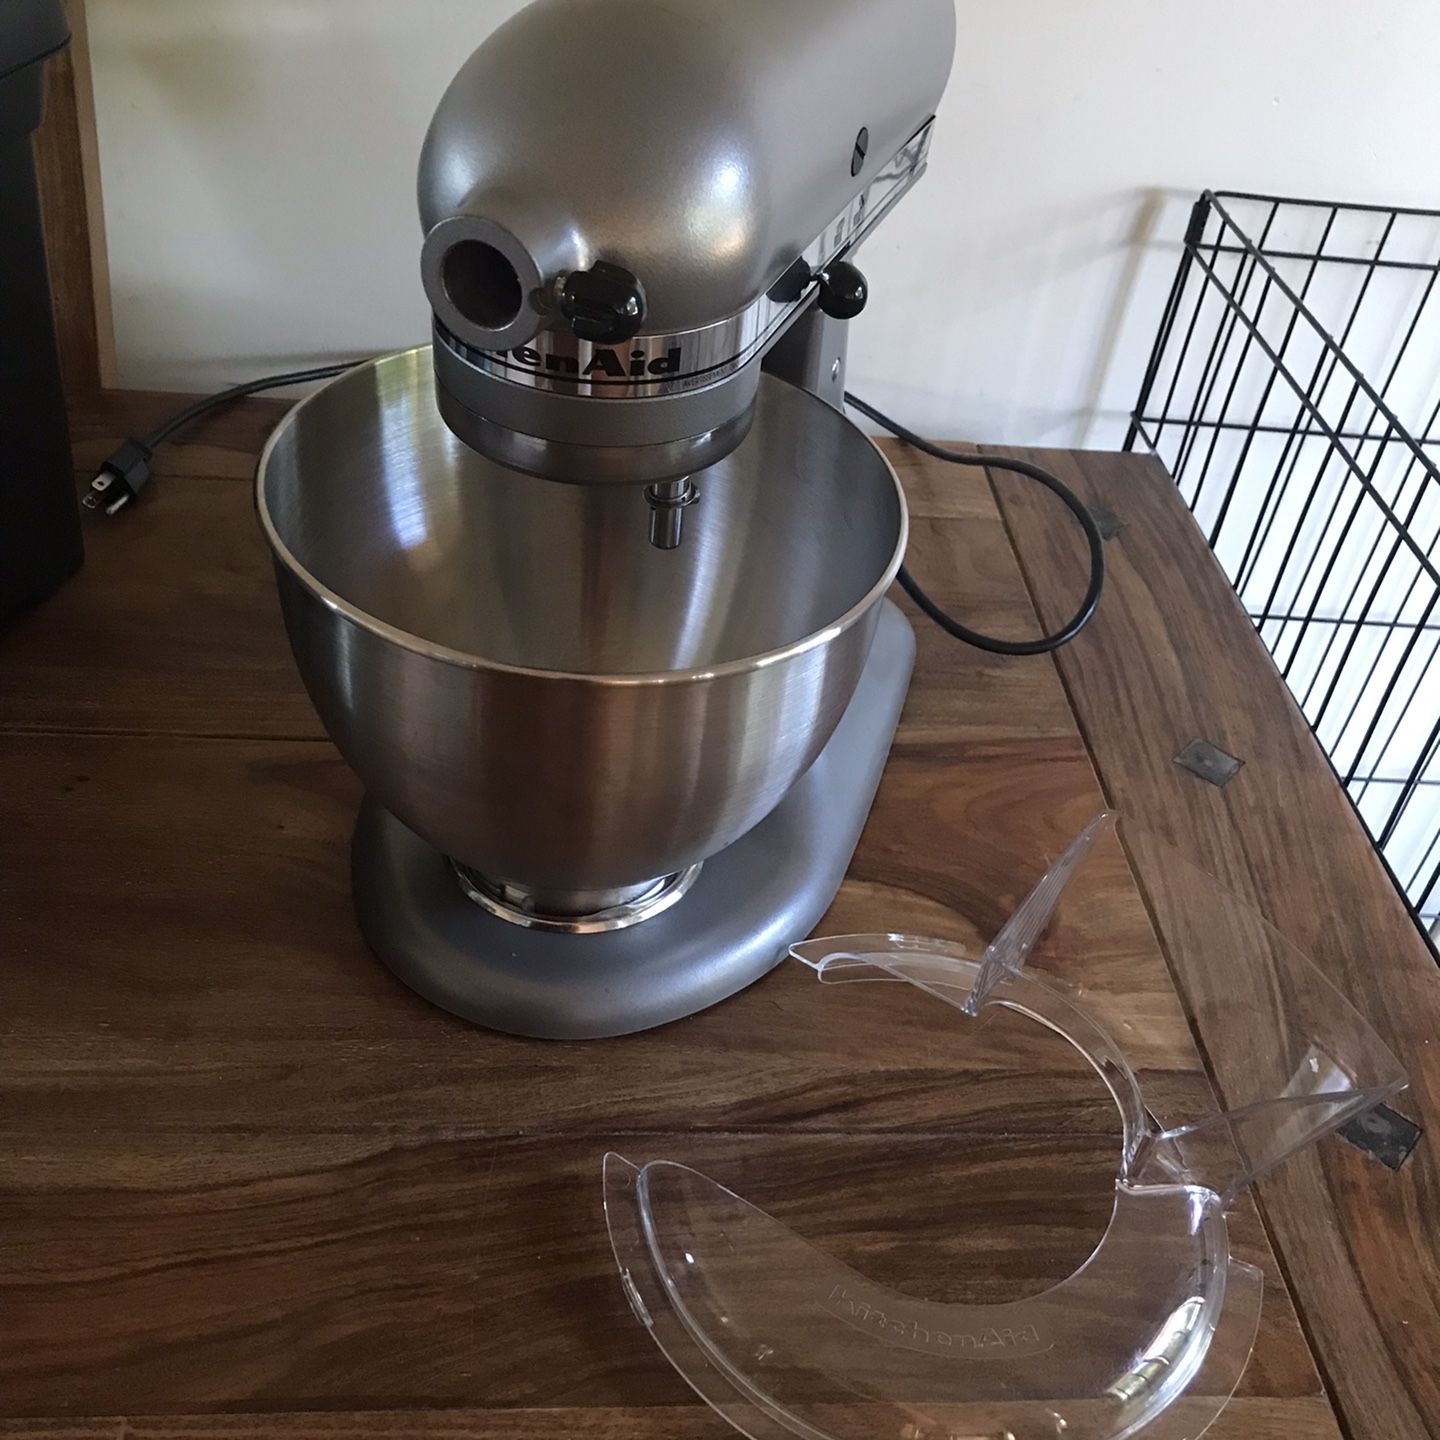 Kitchenaid Stand Mixer Juicer Attachment for Sale in Anchorage, AK - OfferUp